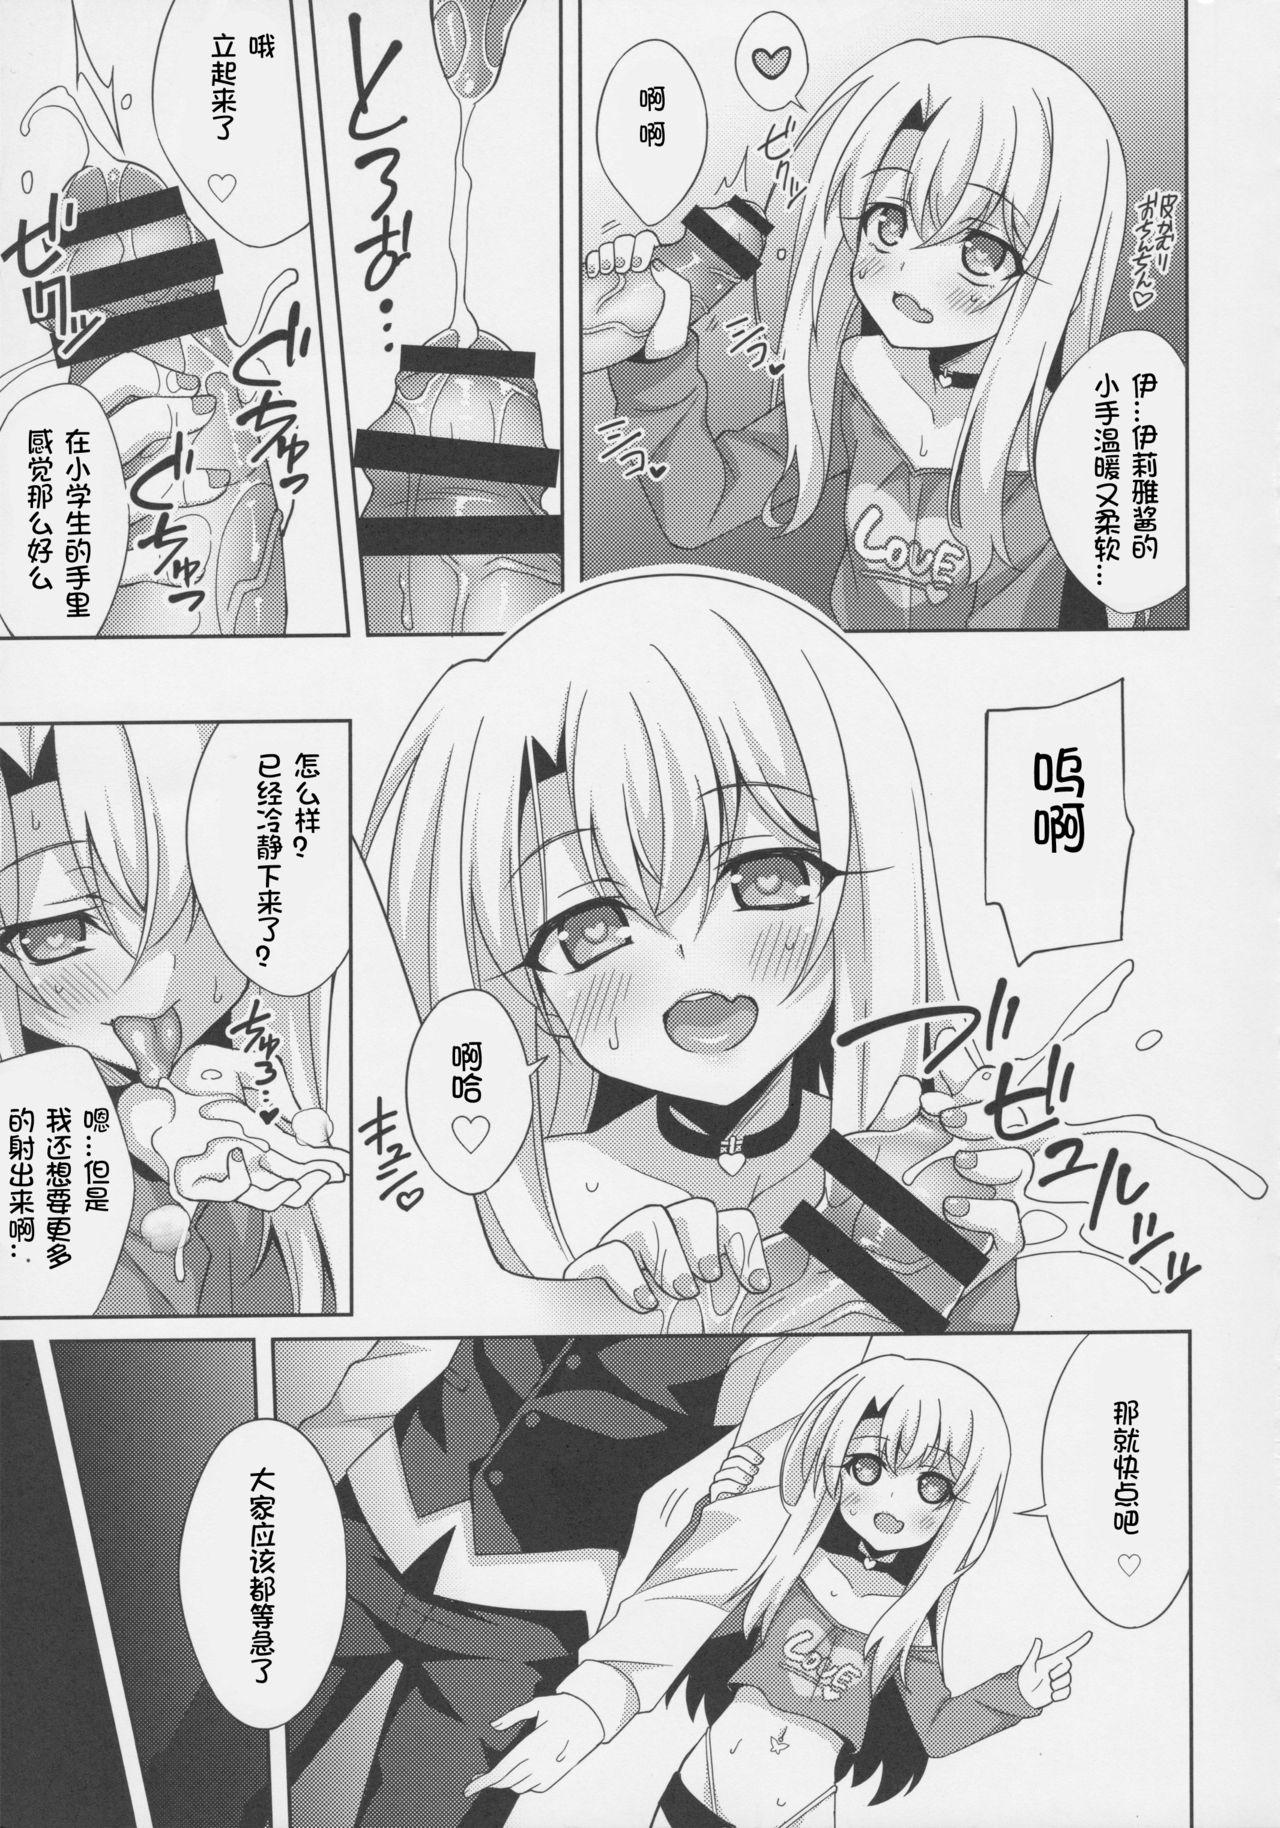 Exgf Illya-chan no Dosukebe Suppox - Fate grand order Cougar - Page 7